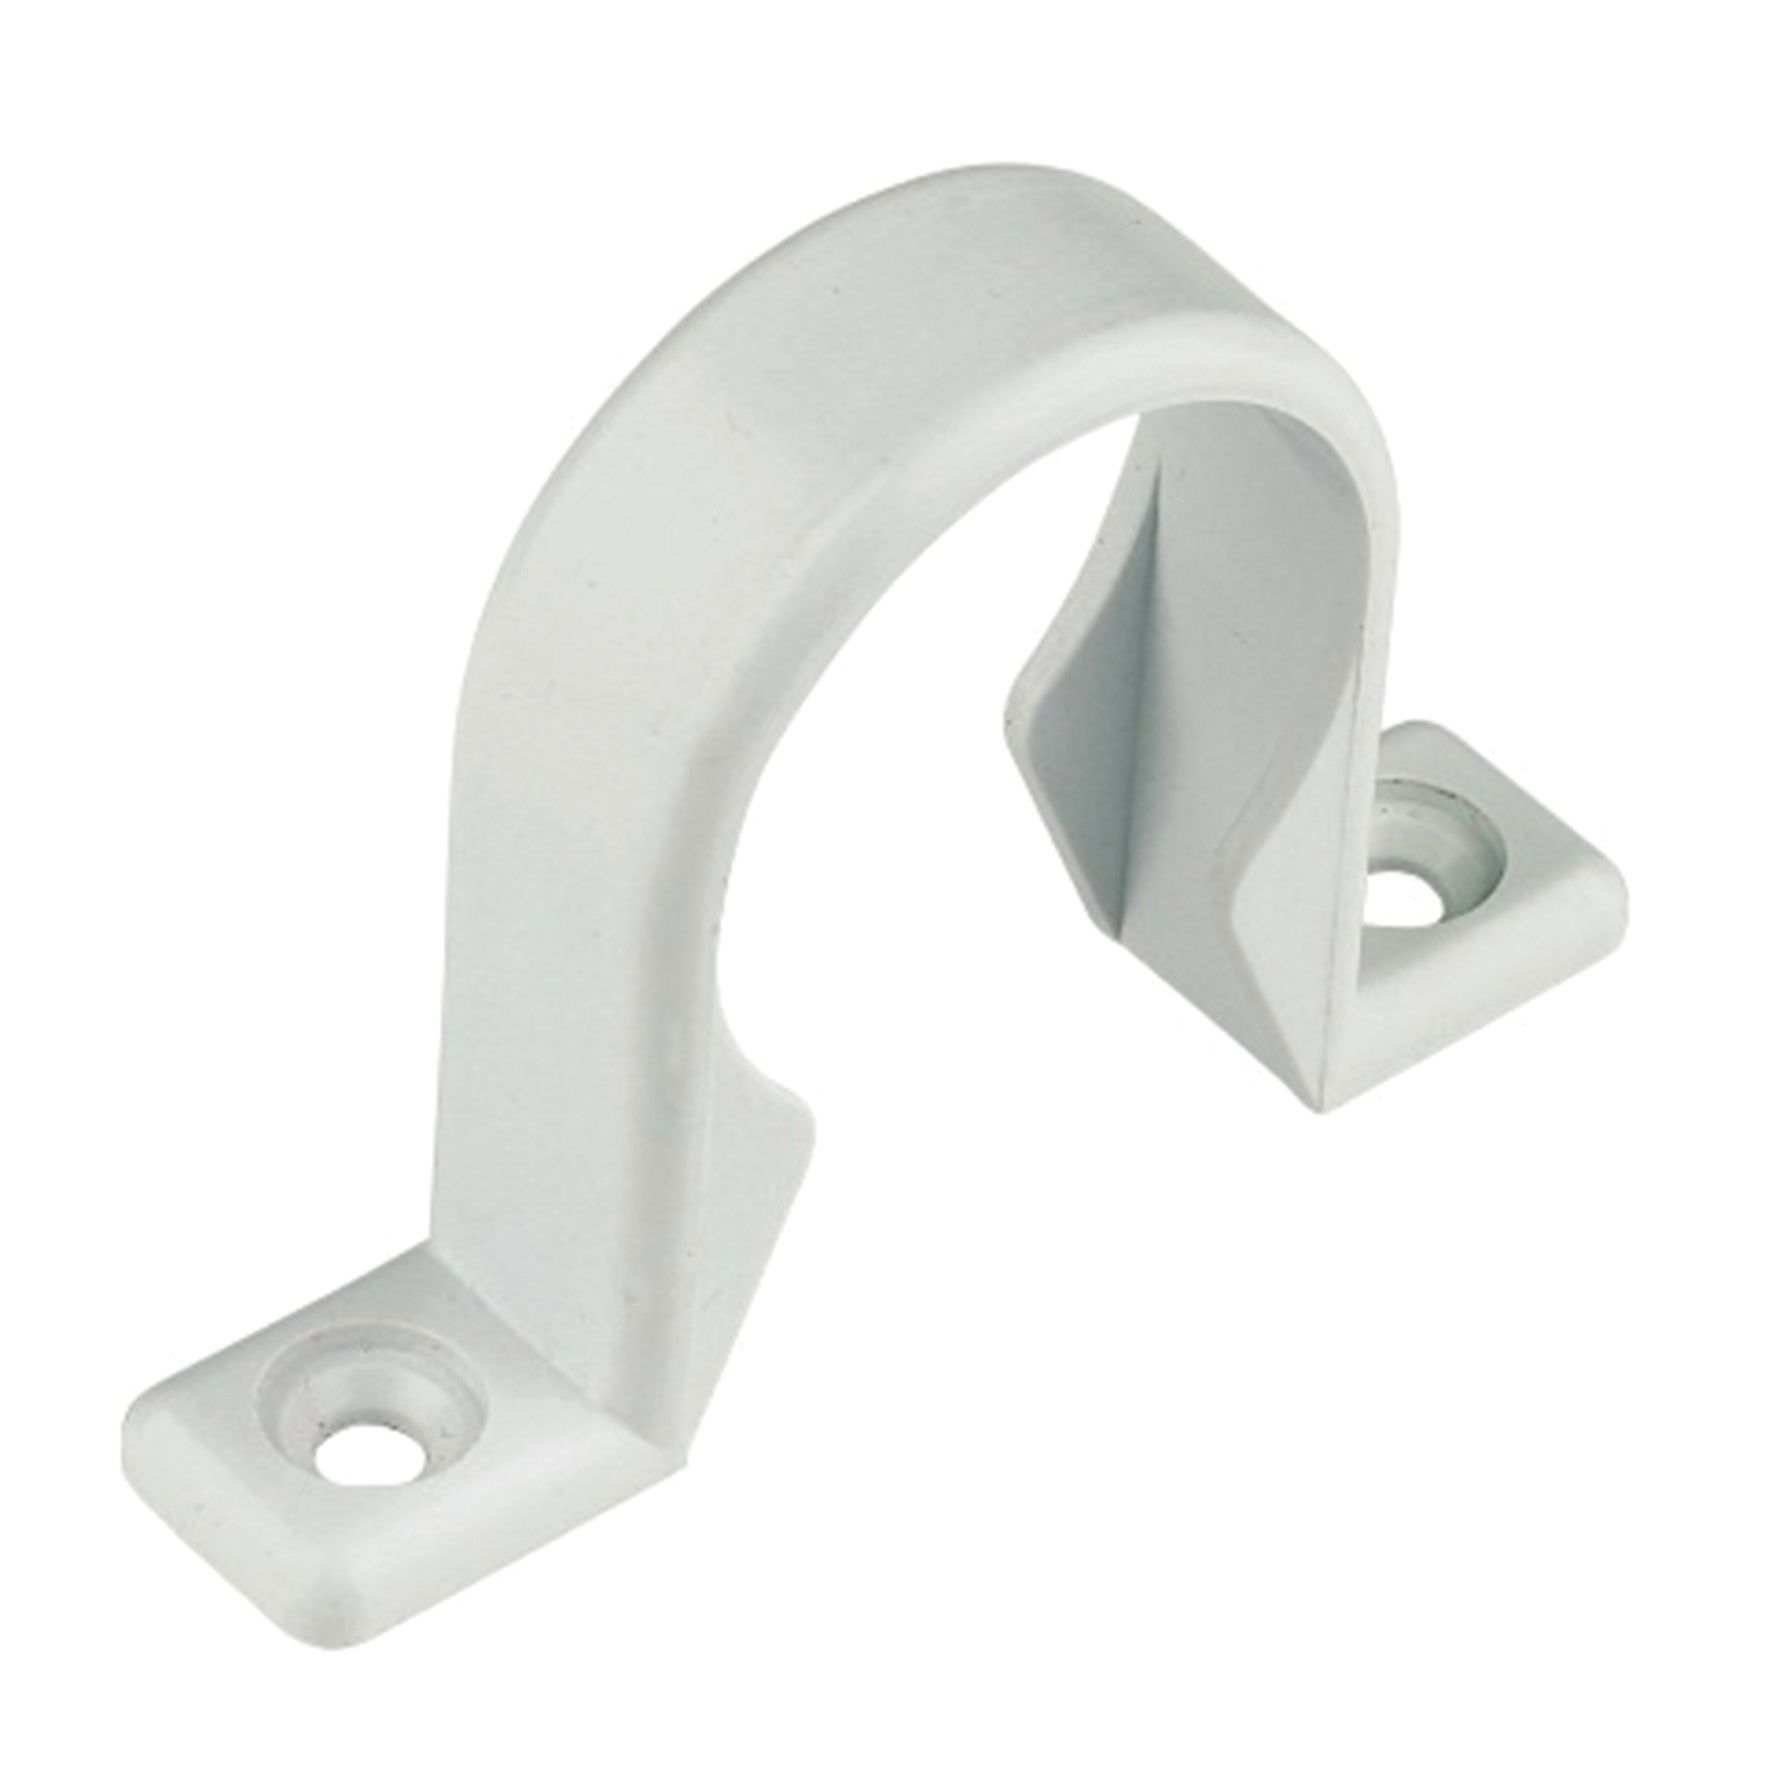 Image of FloPlast WP35W Push-Fit Waste Pipe Clips - White 40mm Pack of 3